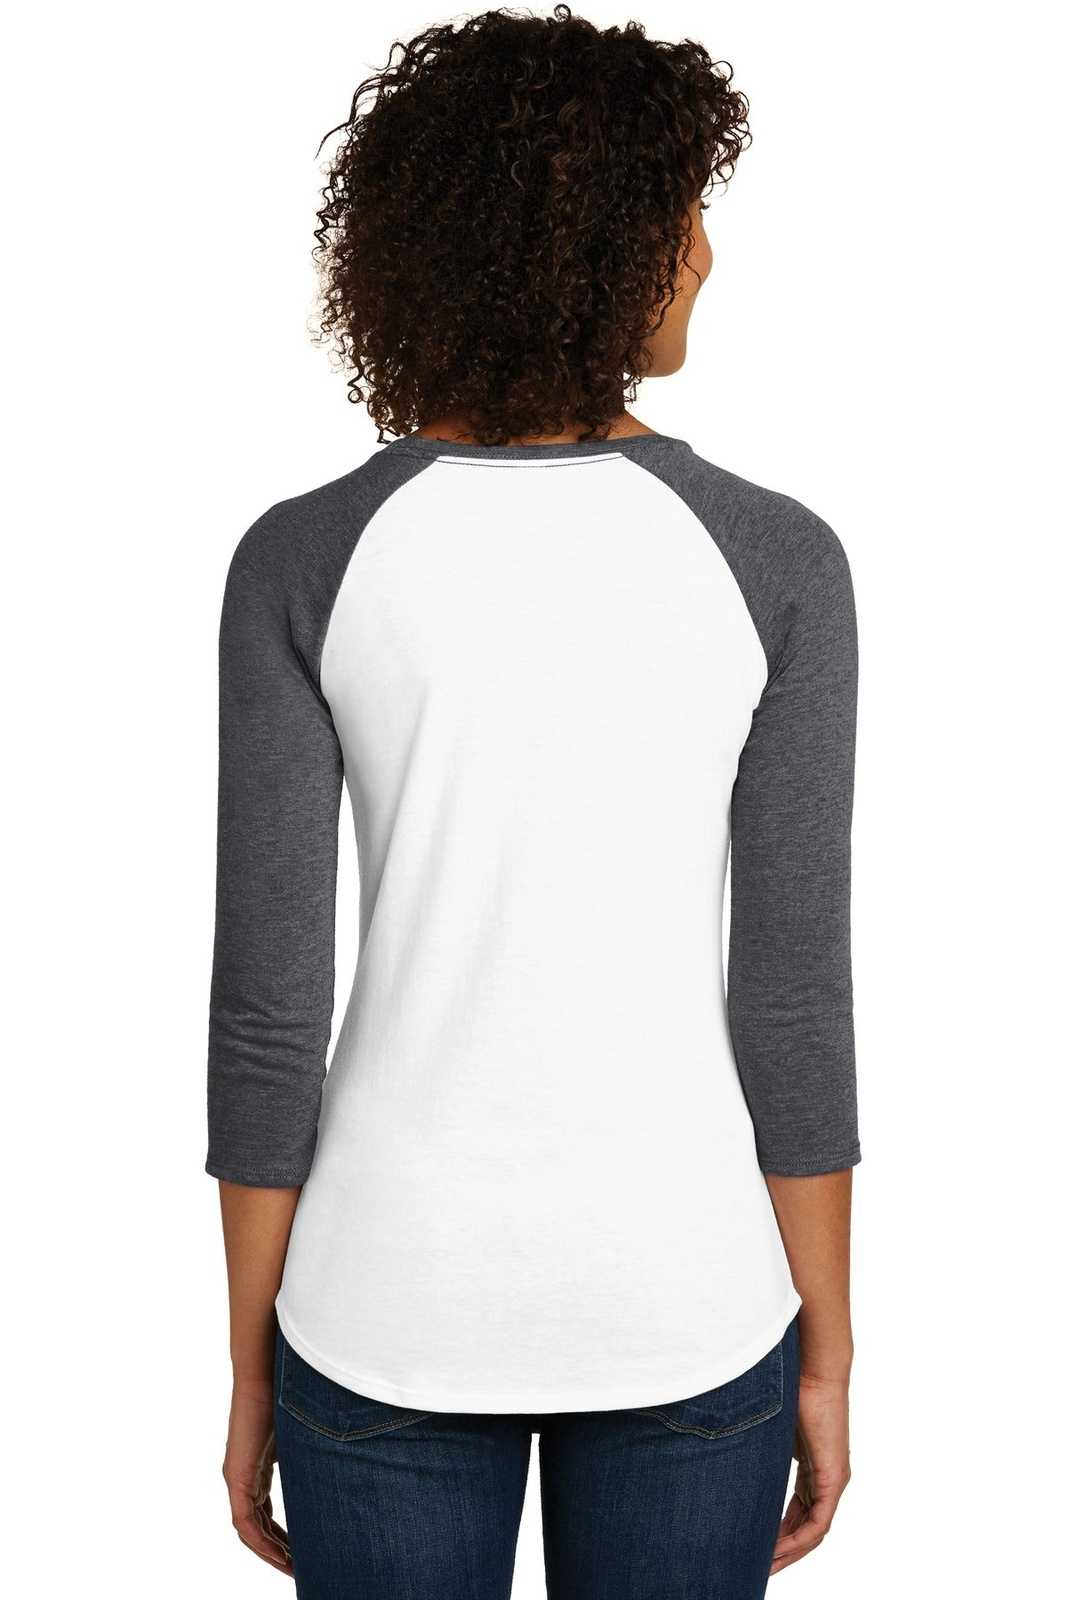 District DT6211 Women's Fitted Very Important Tee 3/4-Sleeve Raglan - Heathered Charcoal White - HIT a Double - 1